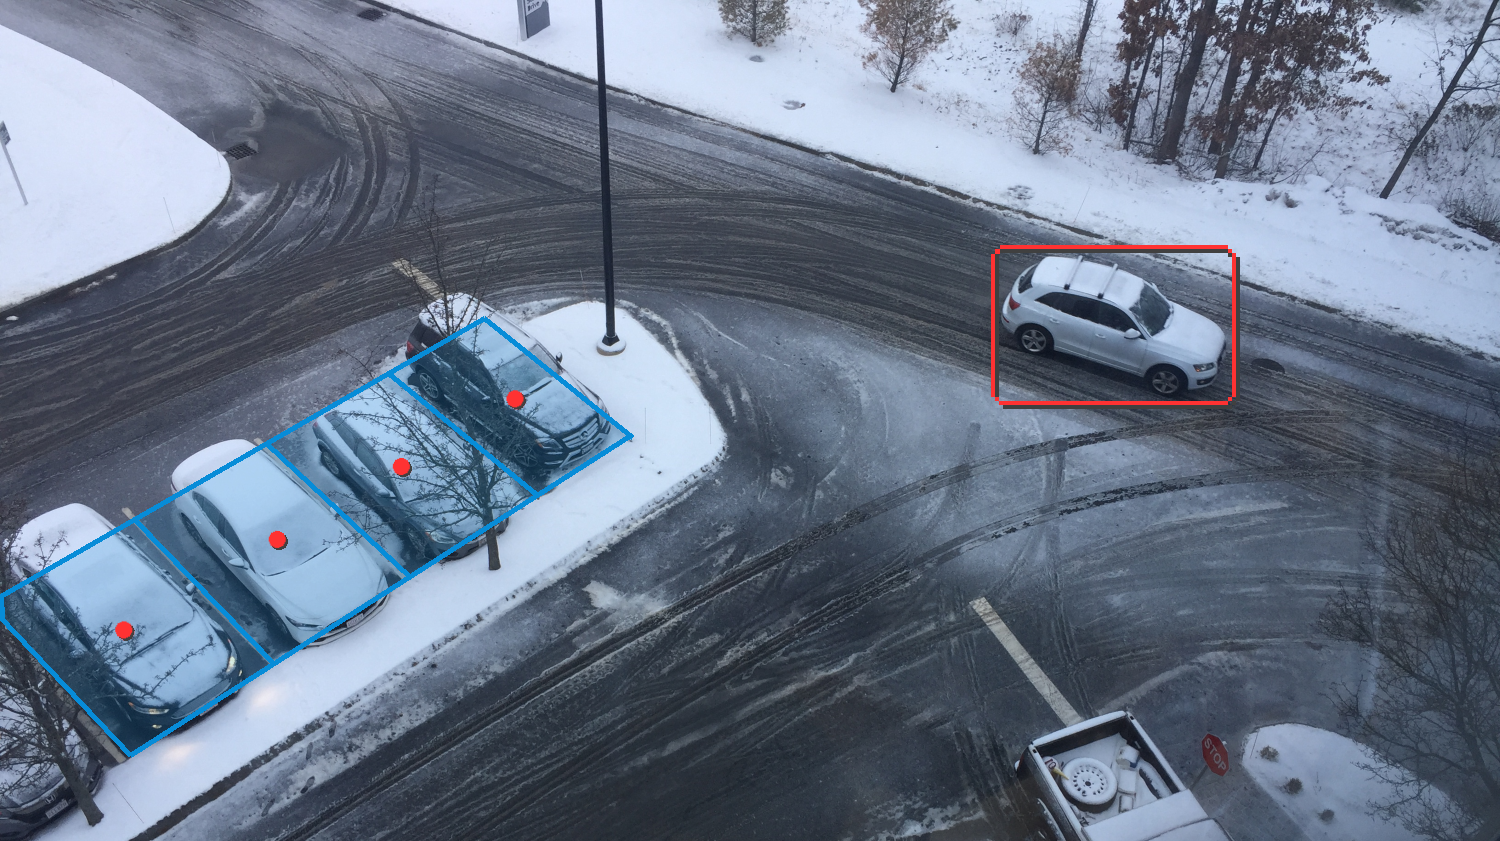 Parking lot monitoring in the snow.